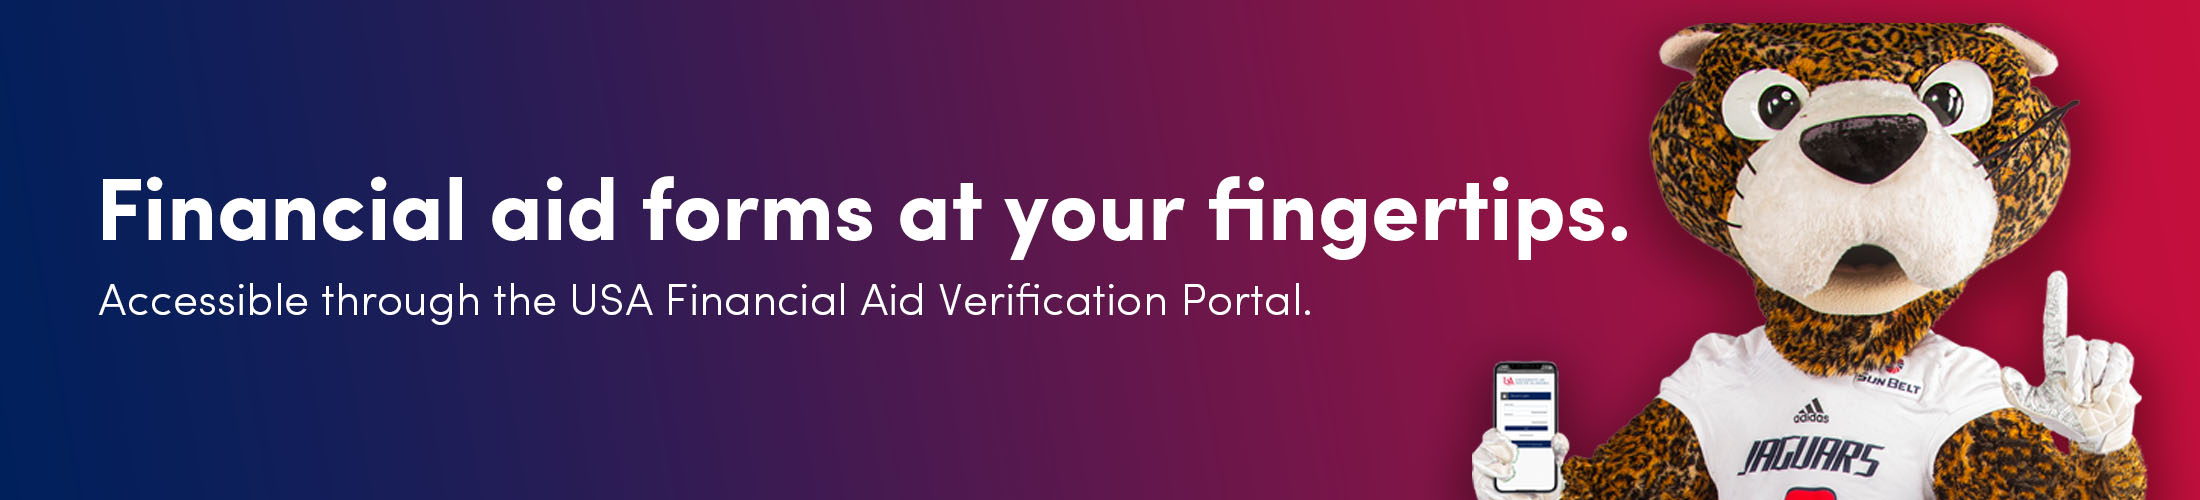 Southpaw with the text Financial aid forms at your fingertips.